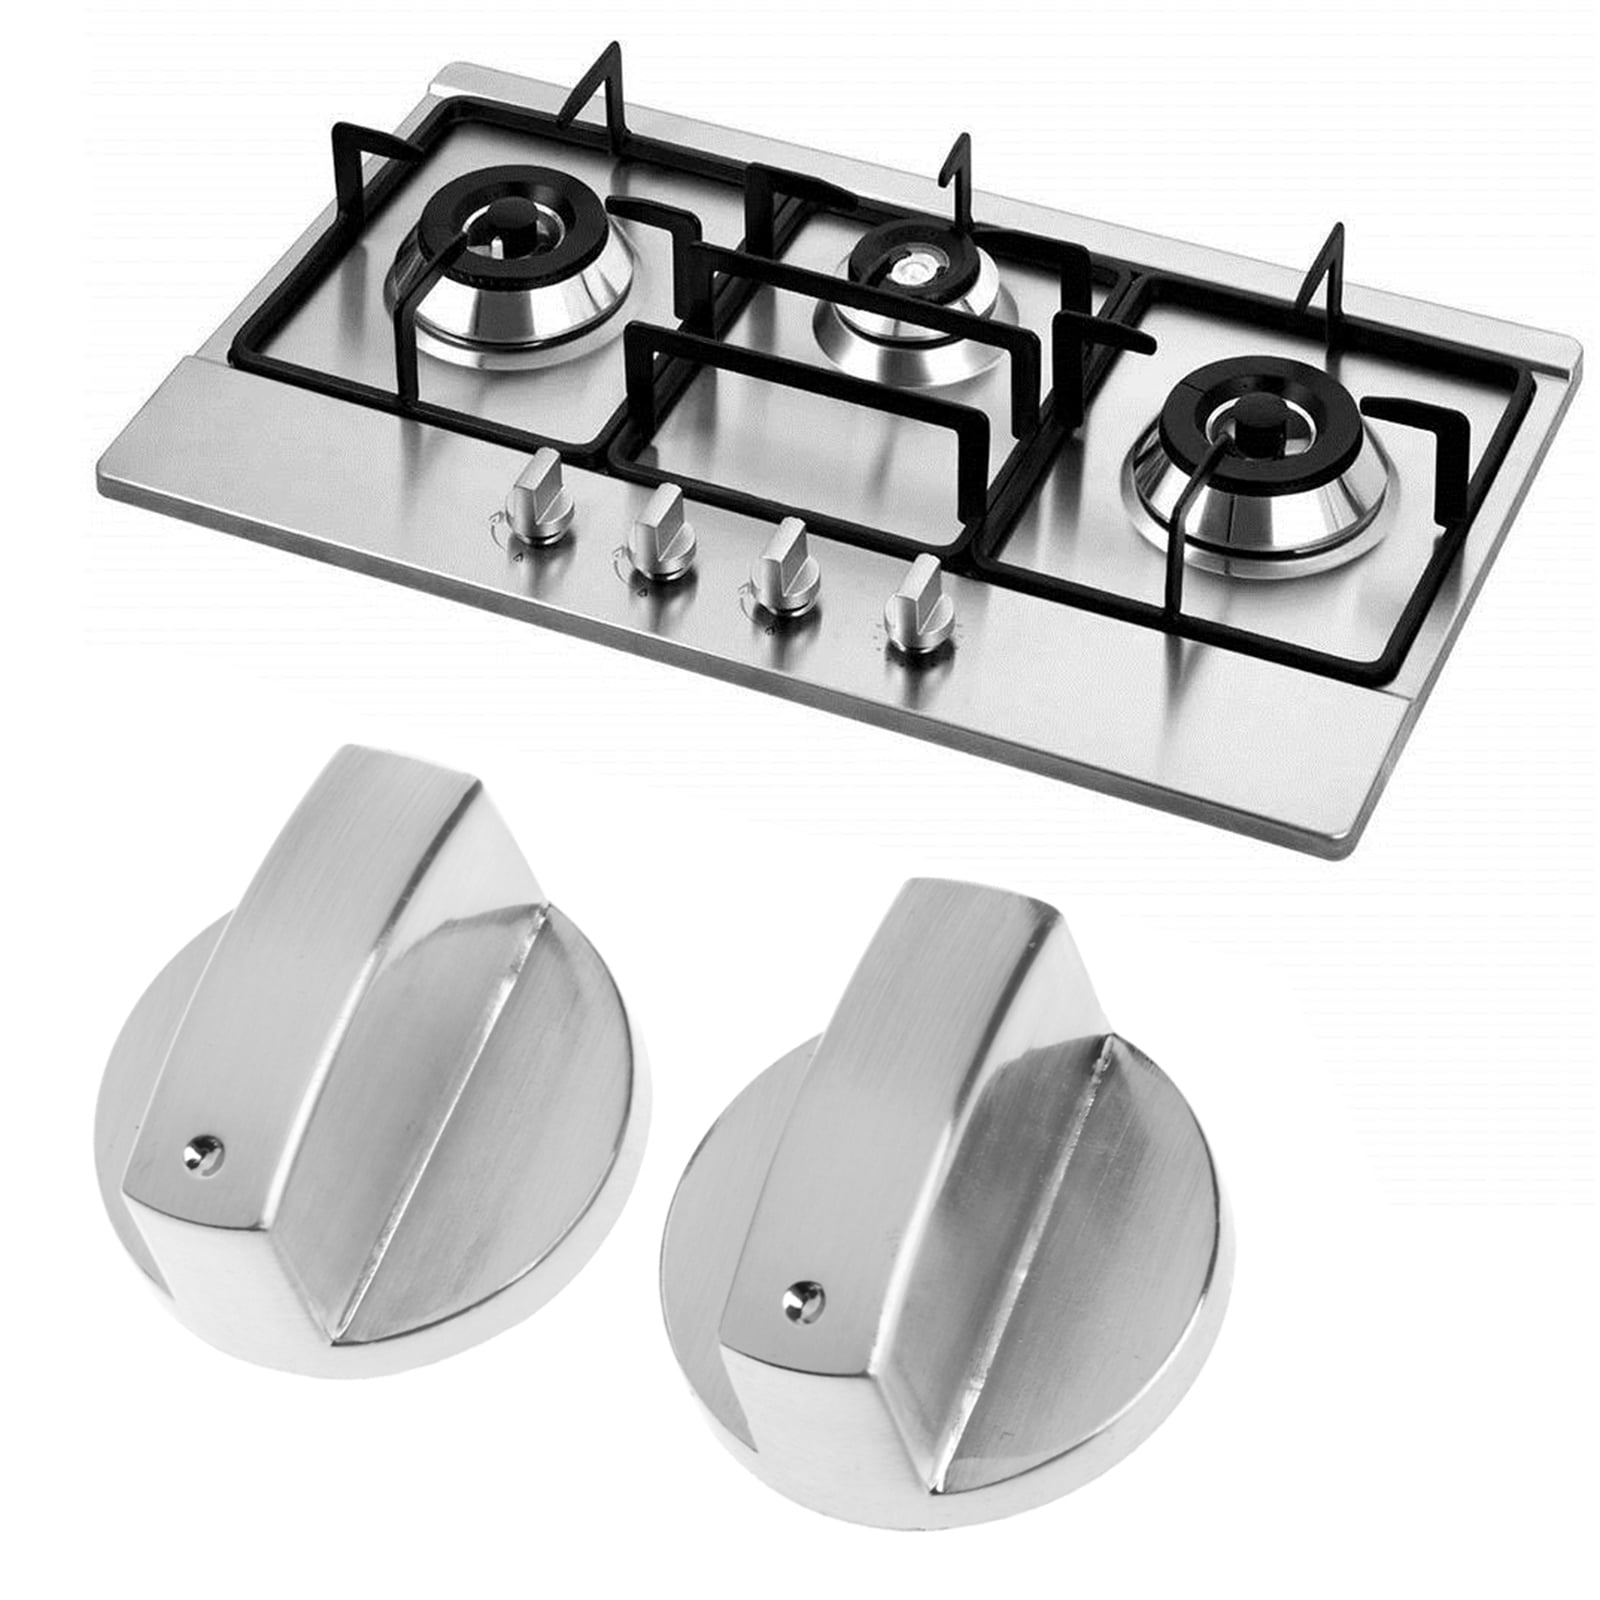 1Pc 6mm 0 Degree Home Kitchen Gas Stove Knob Cooktop Metal Switch Control HM 